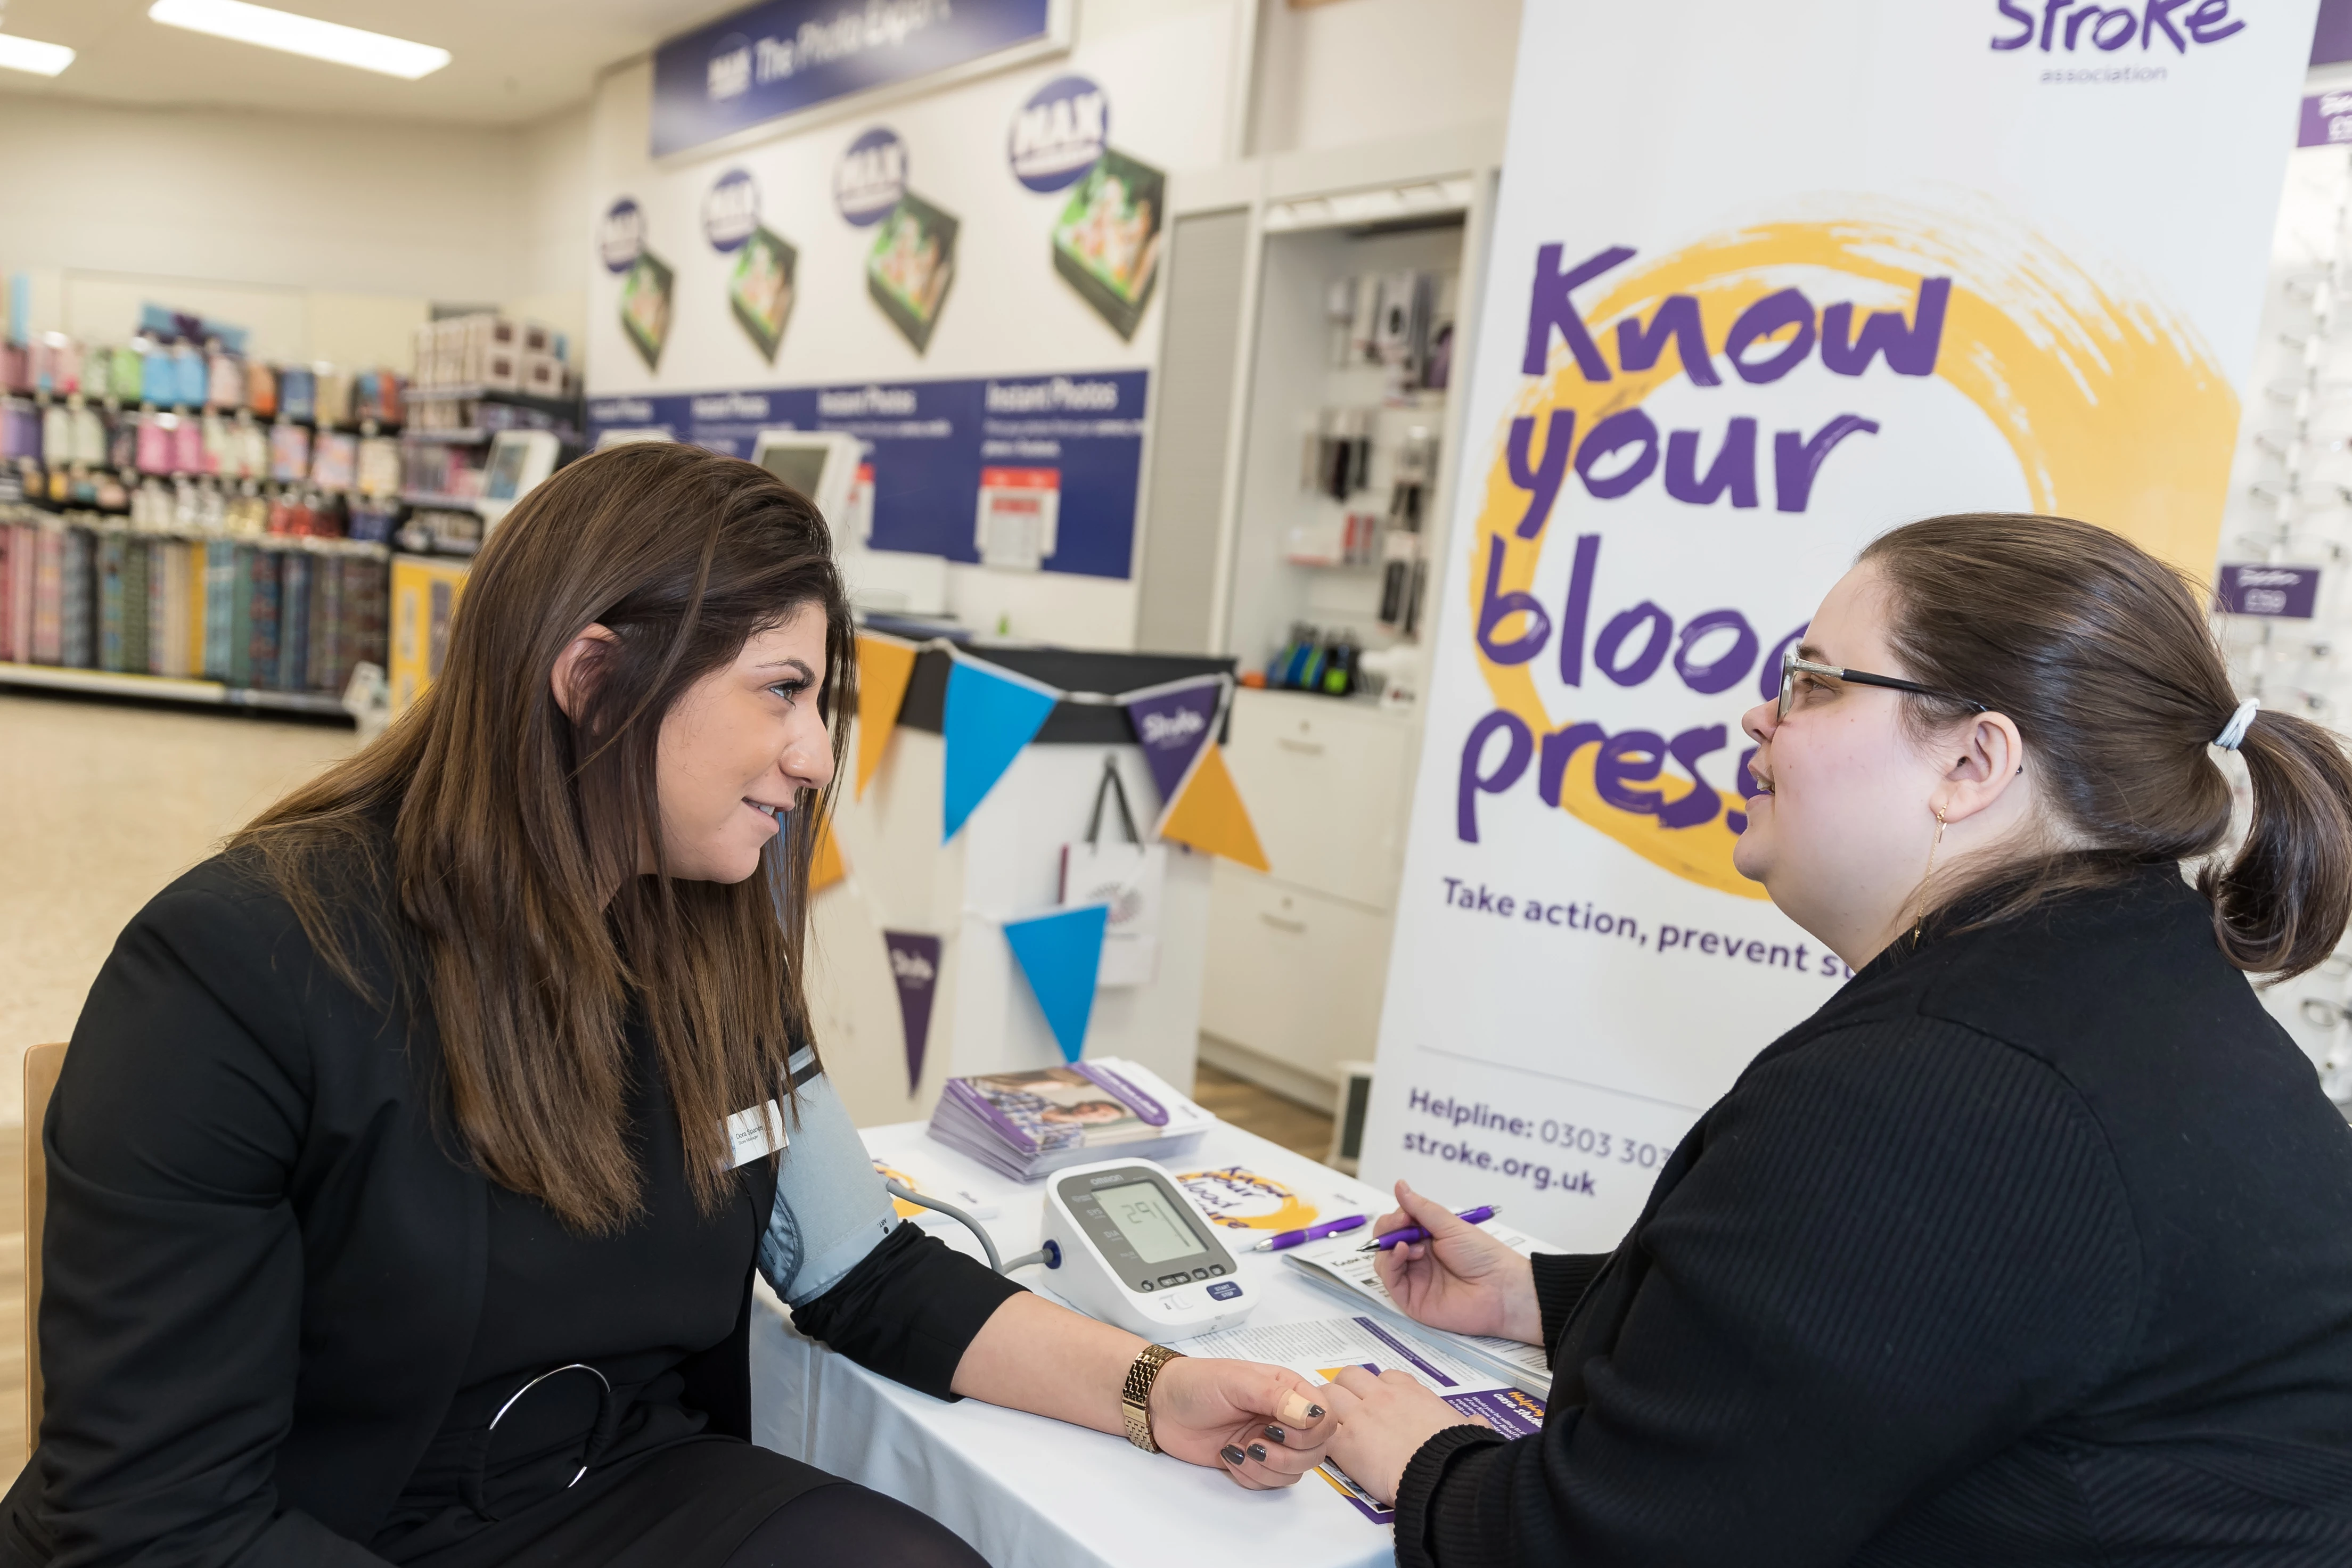 Vision Express Hatfield Store Manager Dora Spanos getting her blood pressure checked with Juliana Oliver, Stroke Association account manager. 